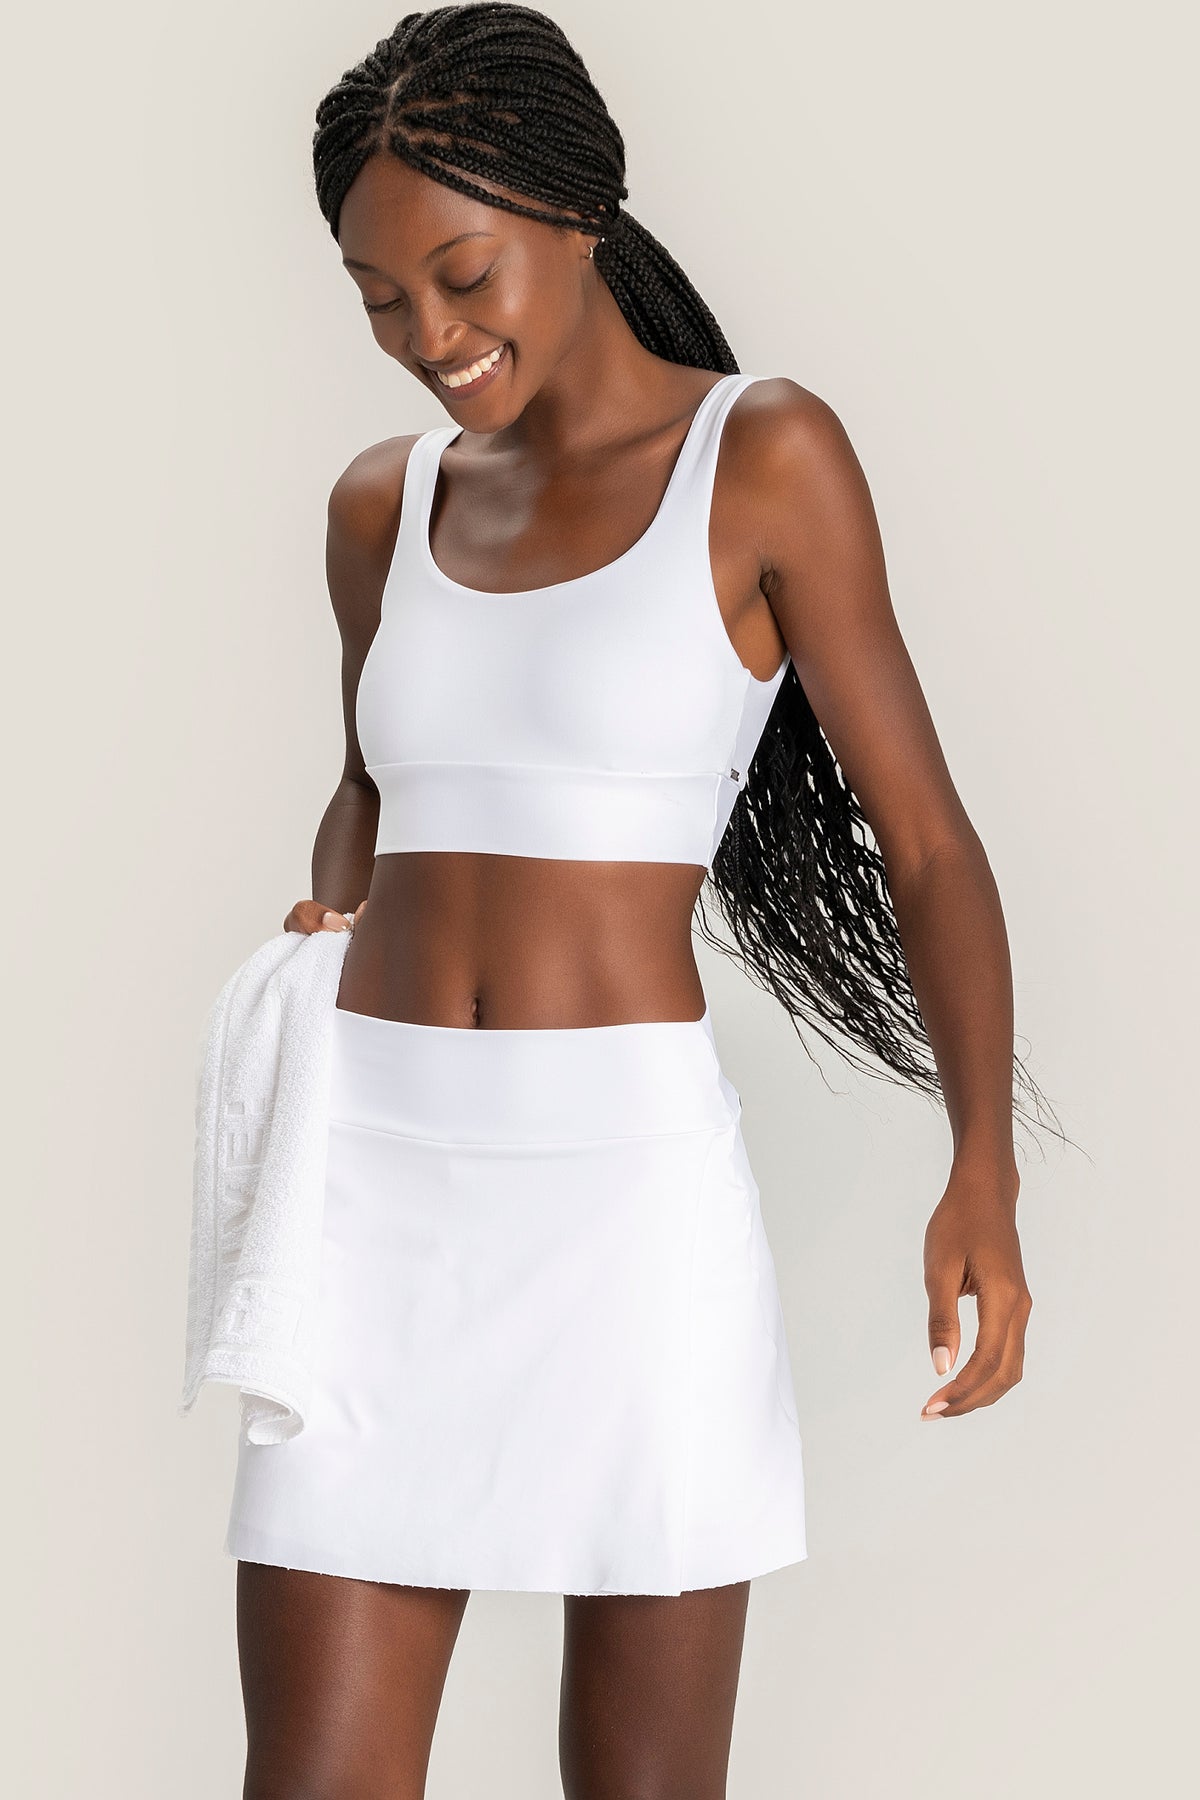 Essential Wellness Strappy Top